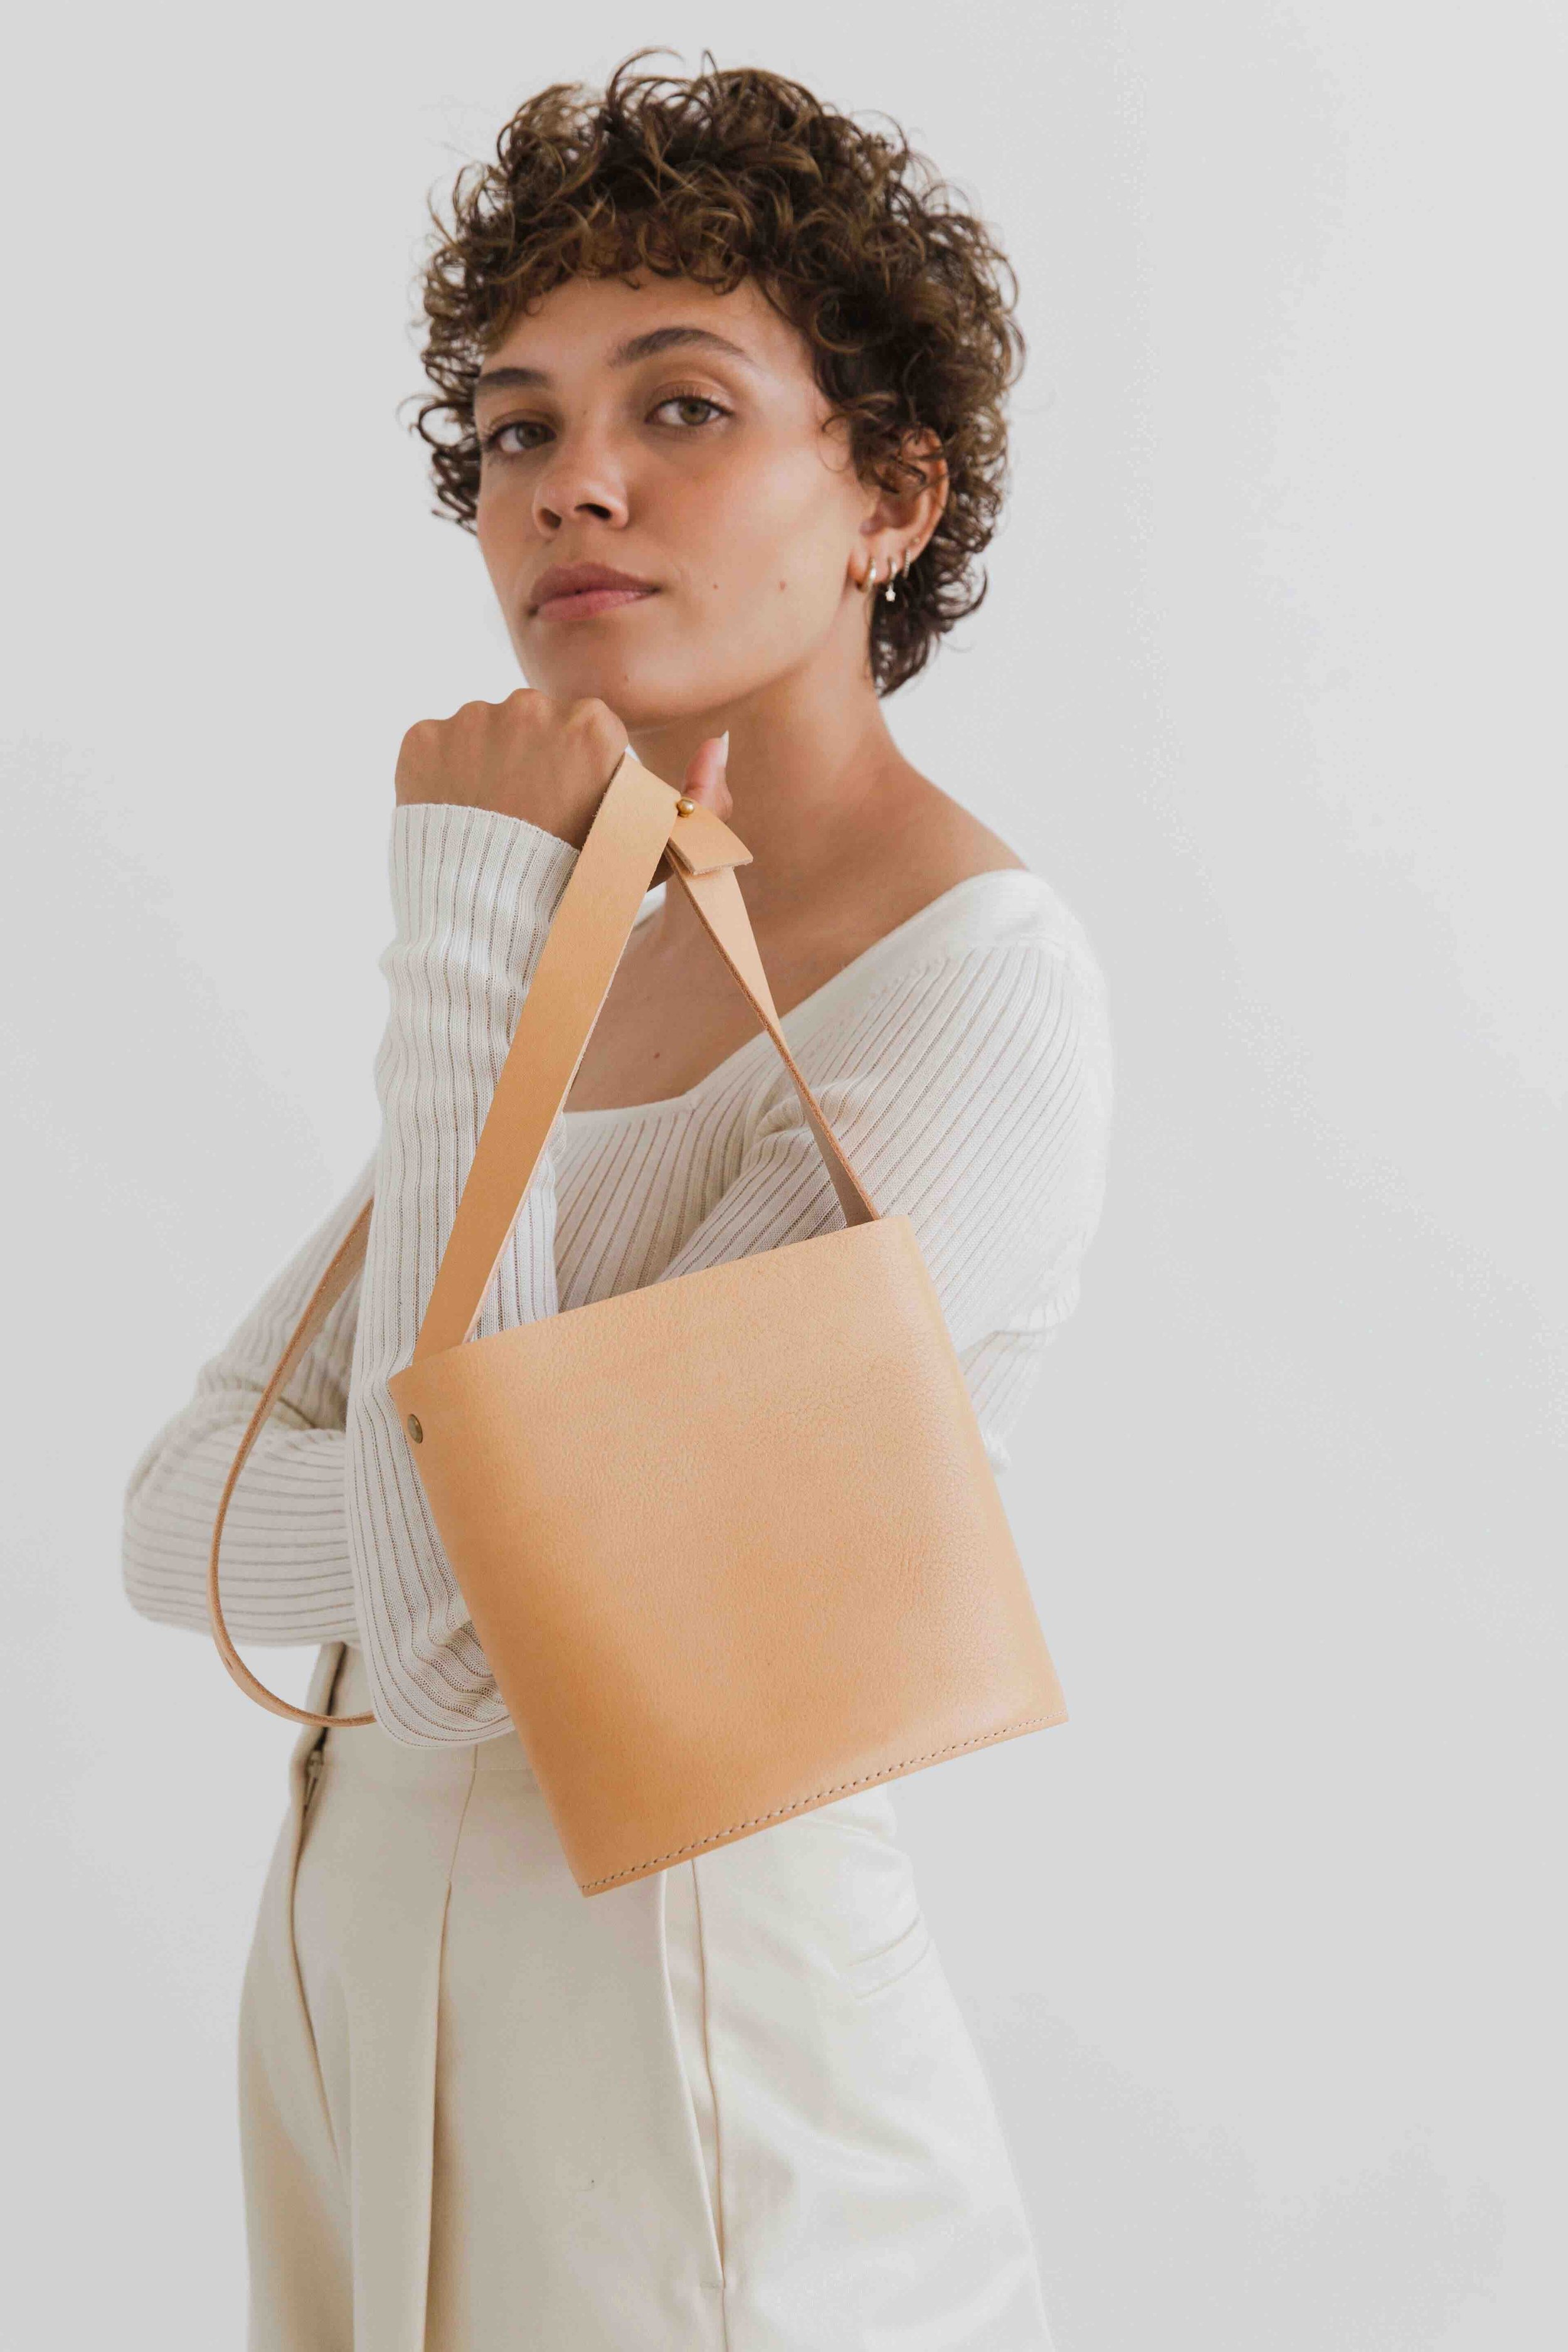 Ethical Leather Bags & Accessories. Sustainably Made in the UK — CARV